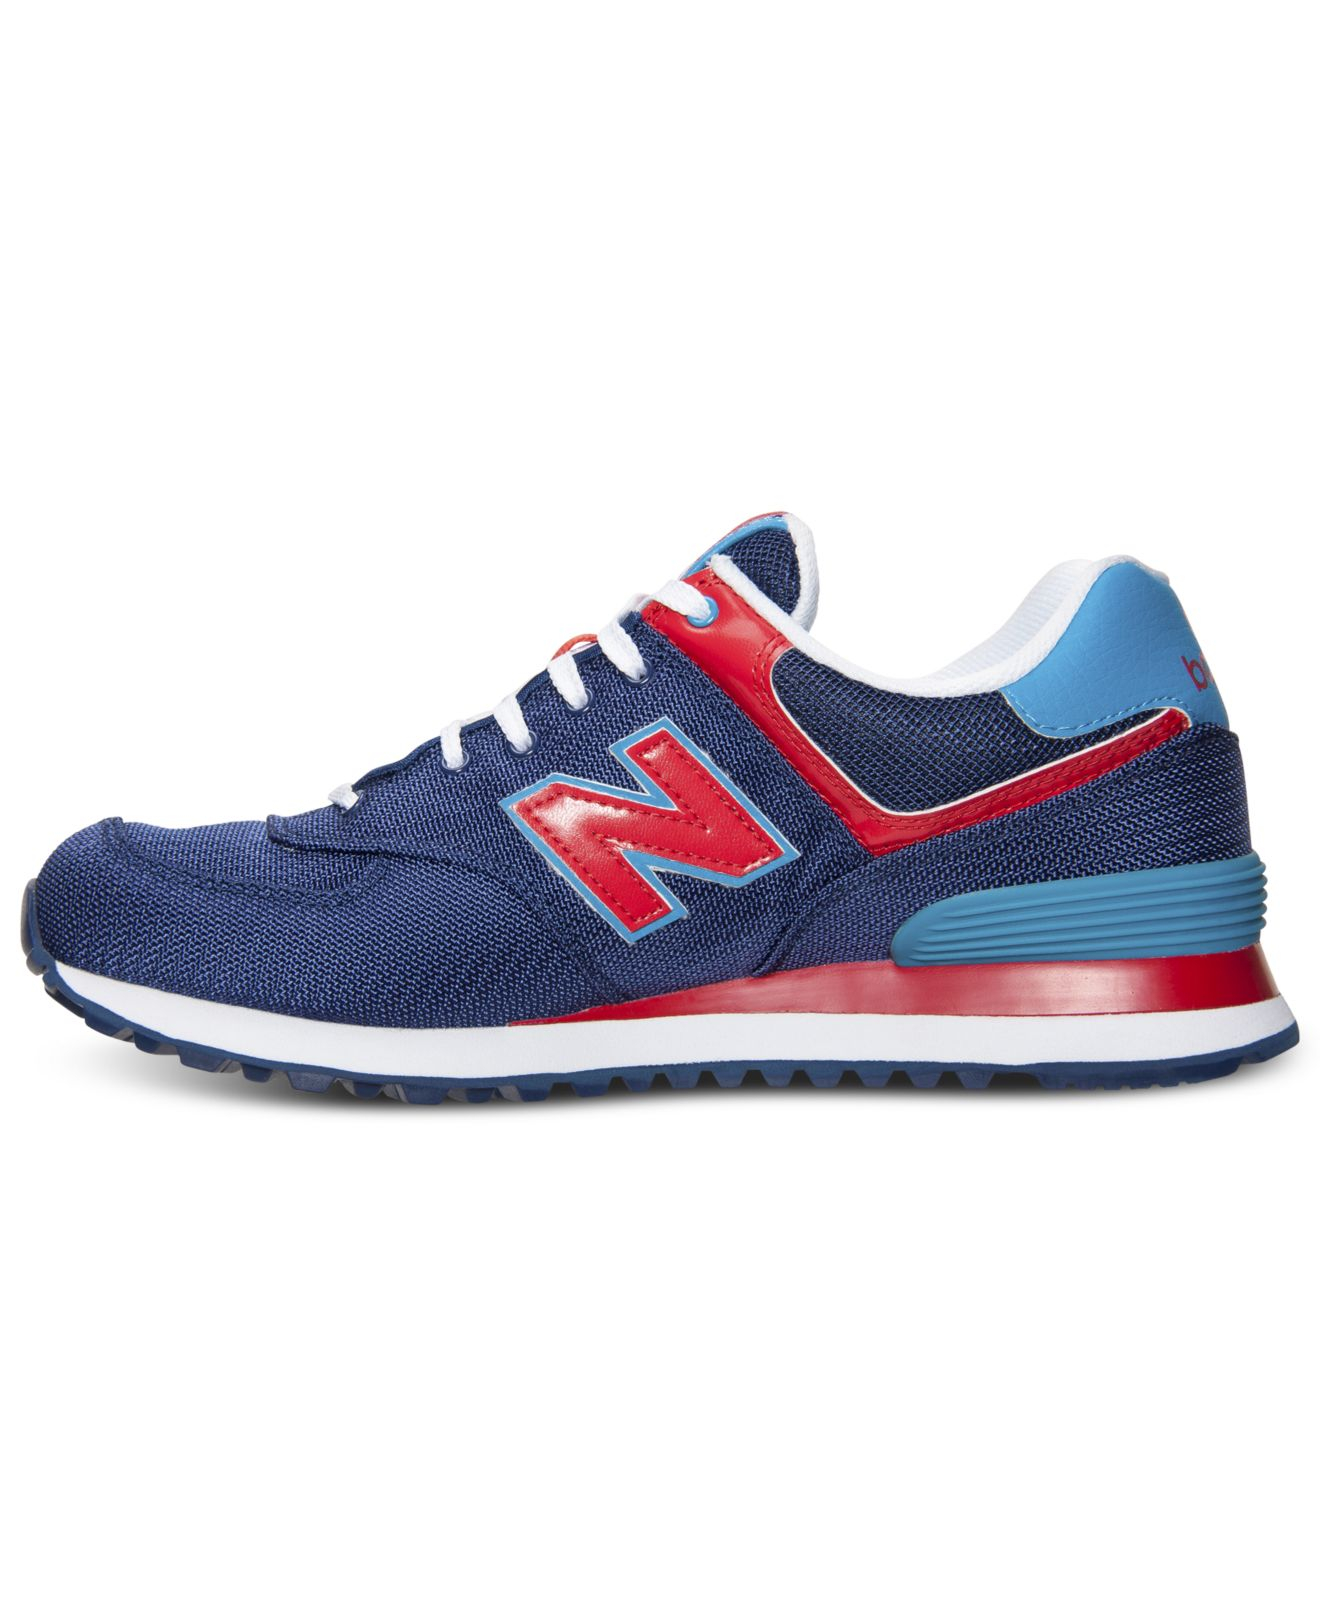 New balance Men'S 574 Passport Casual Sneakers From Finish Line in Blue ...